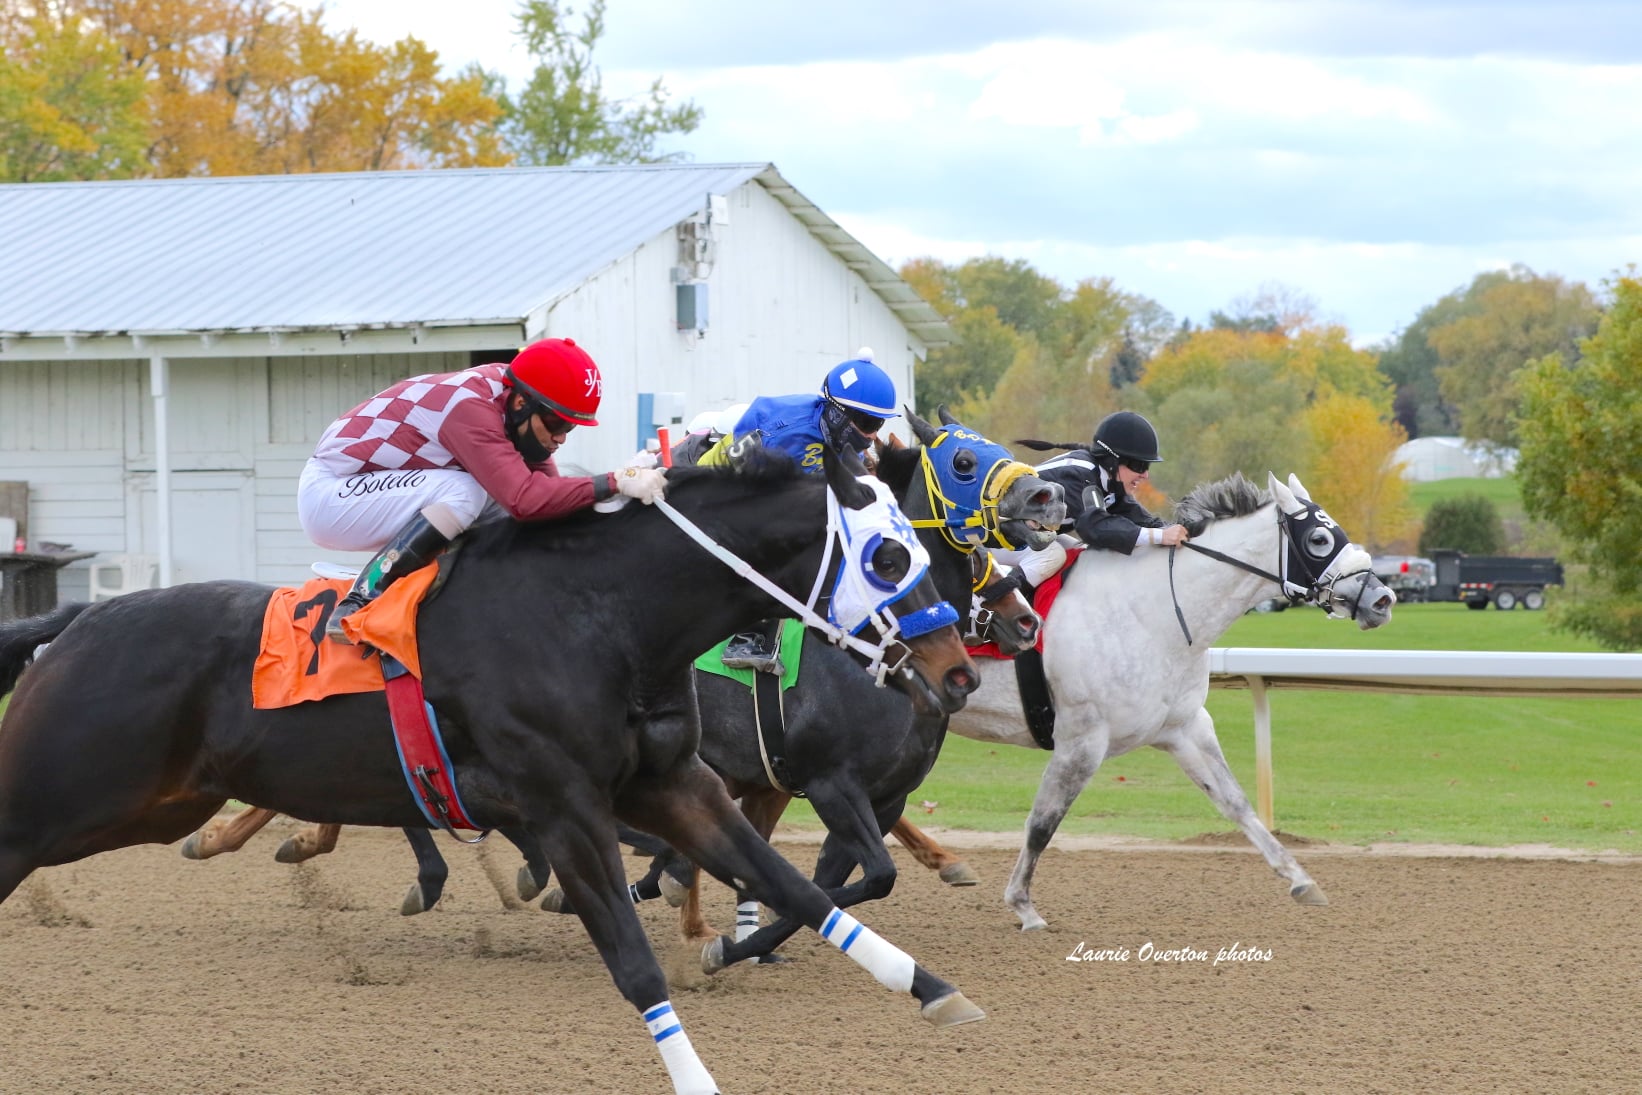 Ajax Downs Set For First Full Quarter Horse Racing Season in Two Years